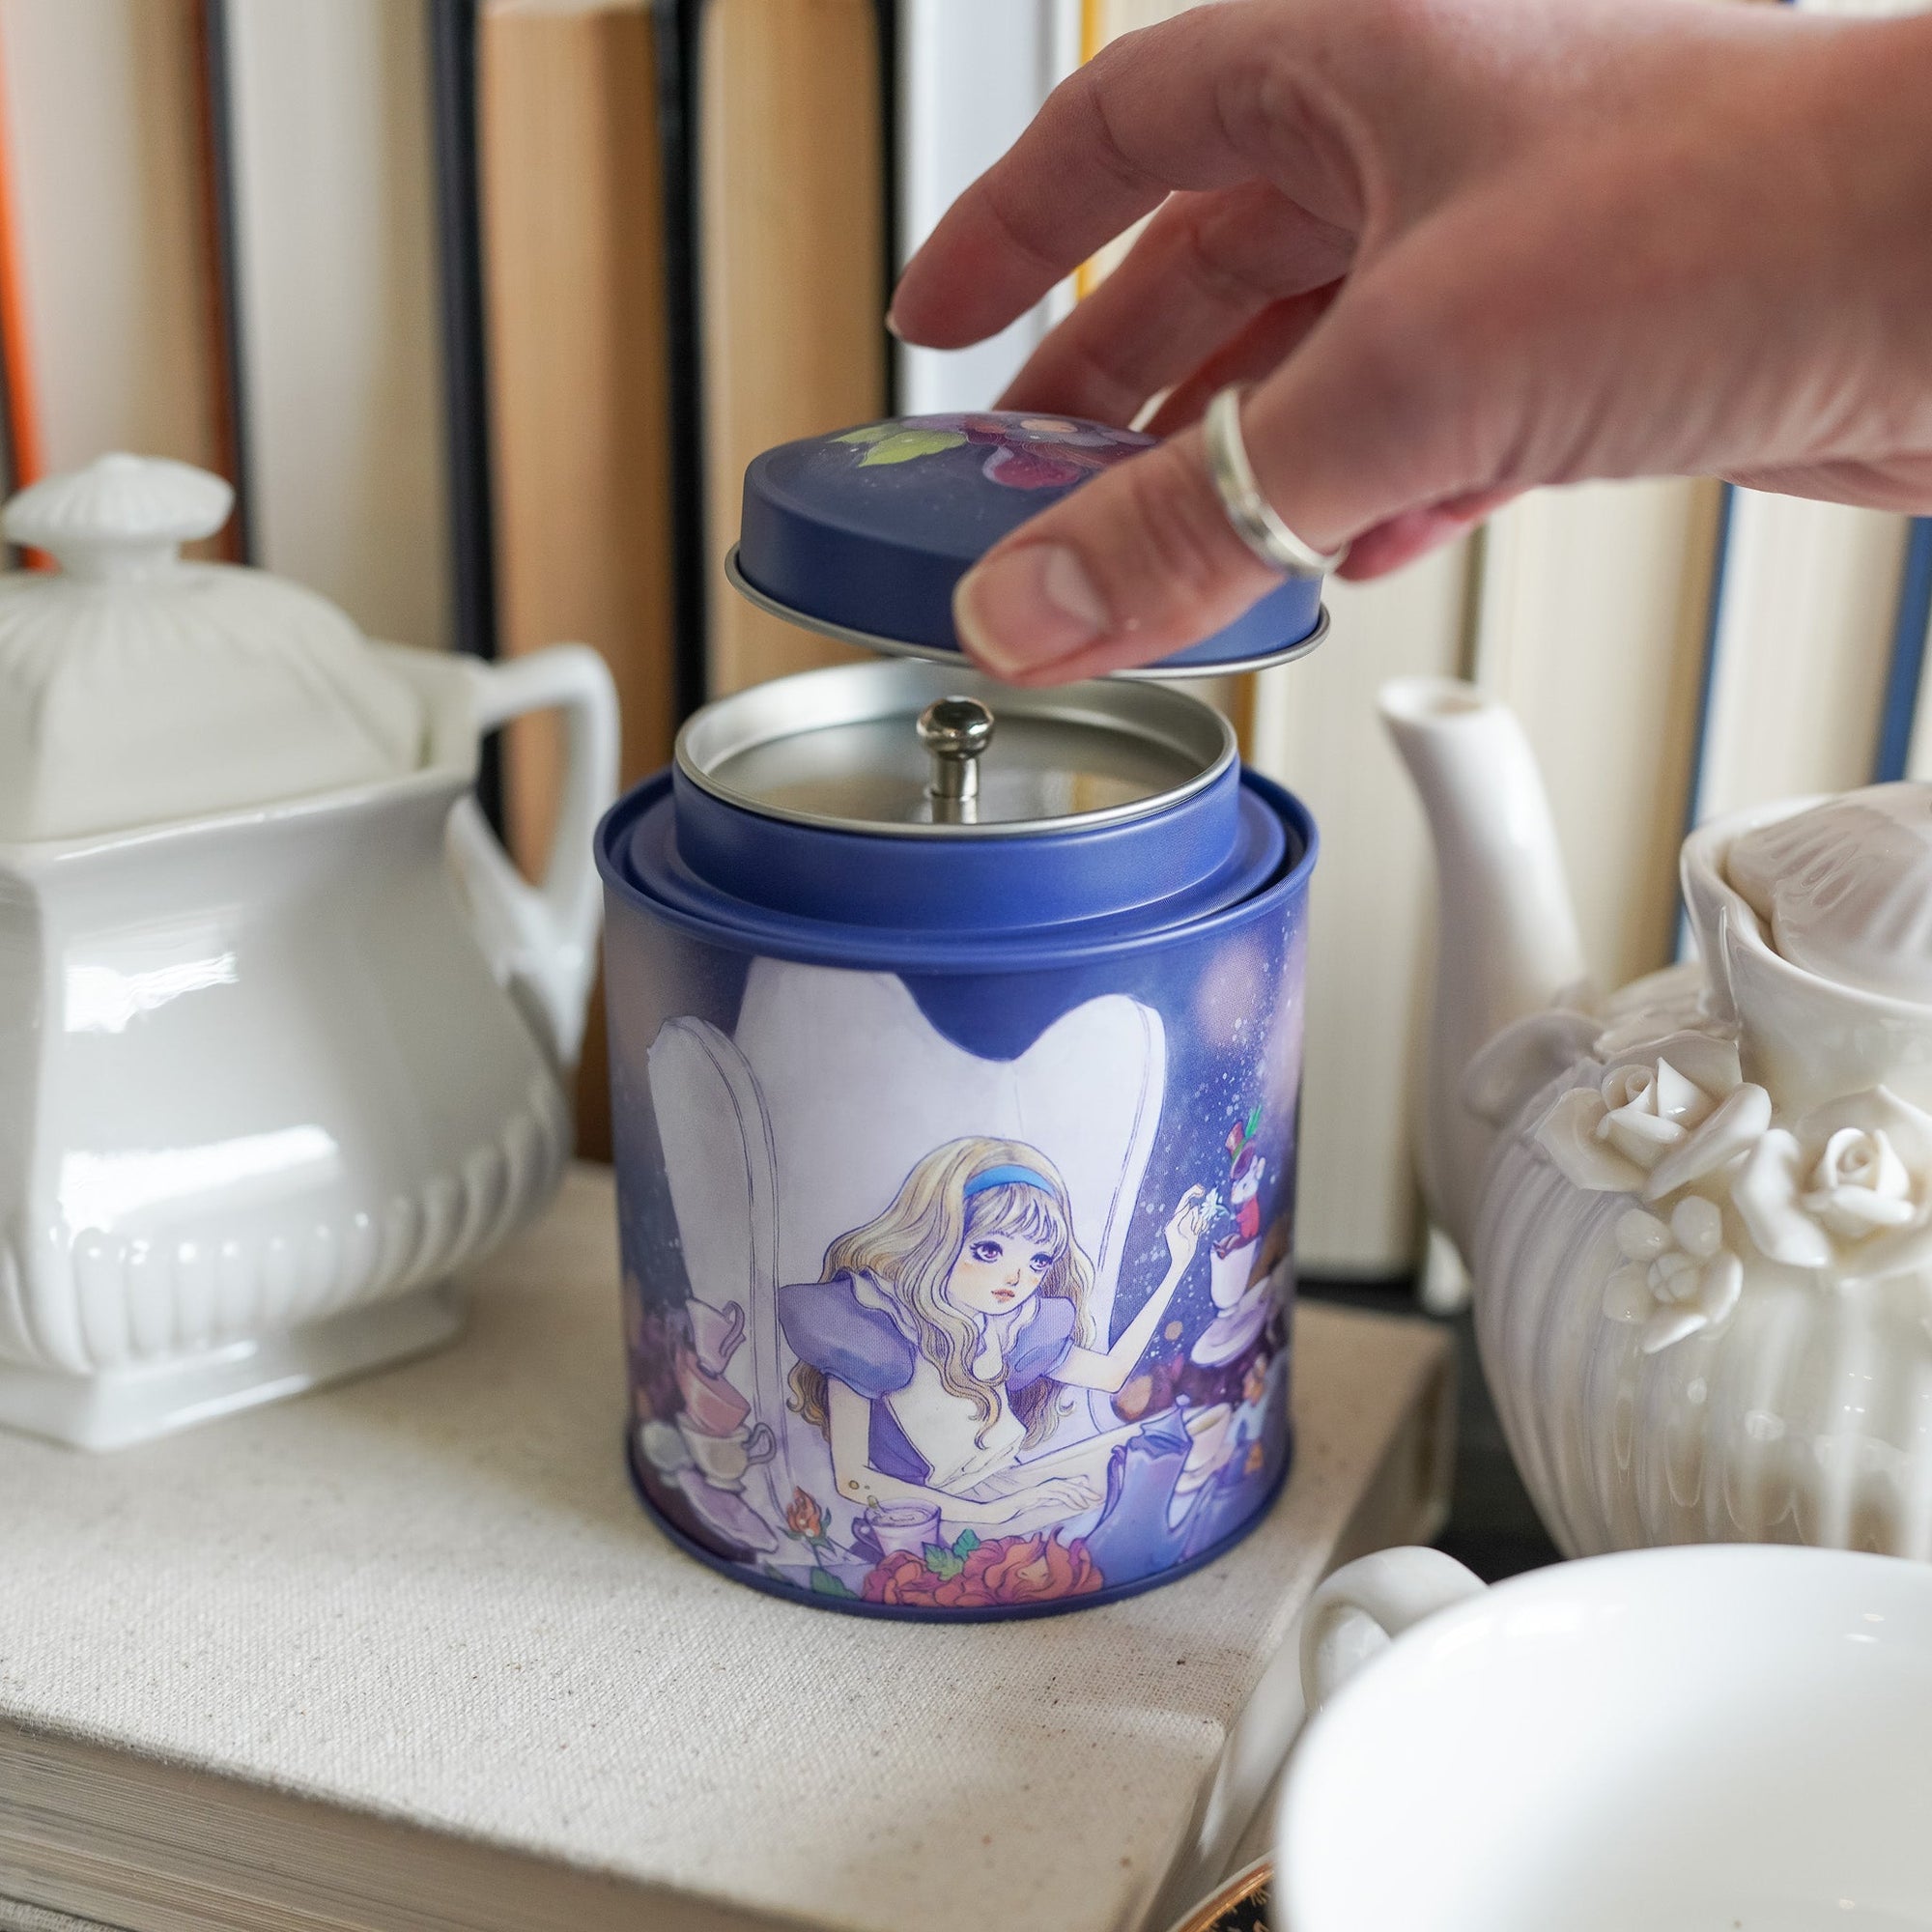 Round metal Alice in Wonderland Tea Tin with Alice, Mad Hatter, and Rabbit sitting at a table for tea time.